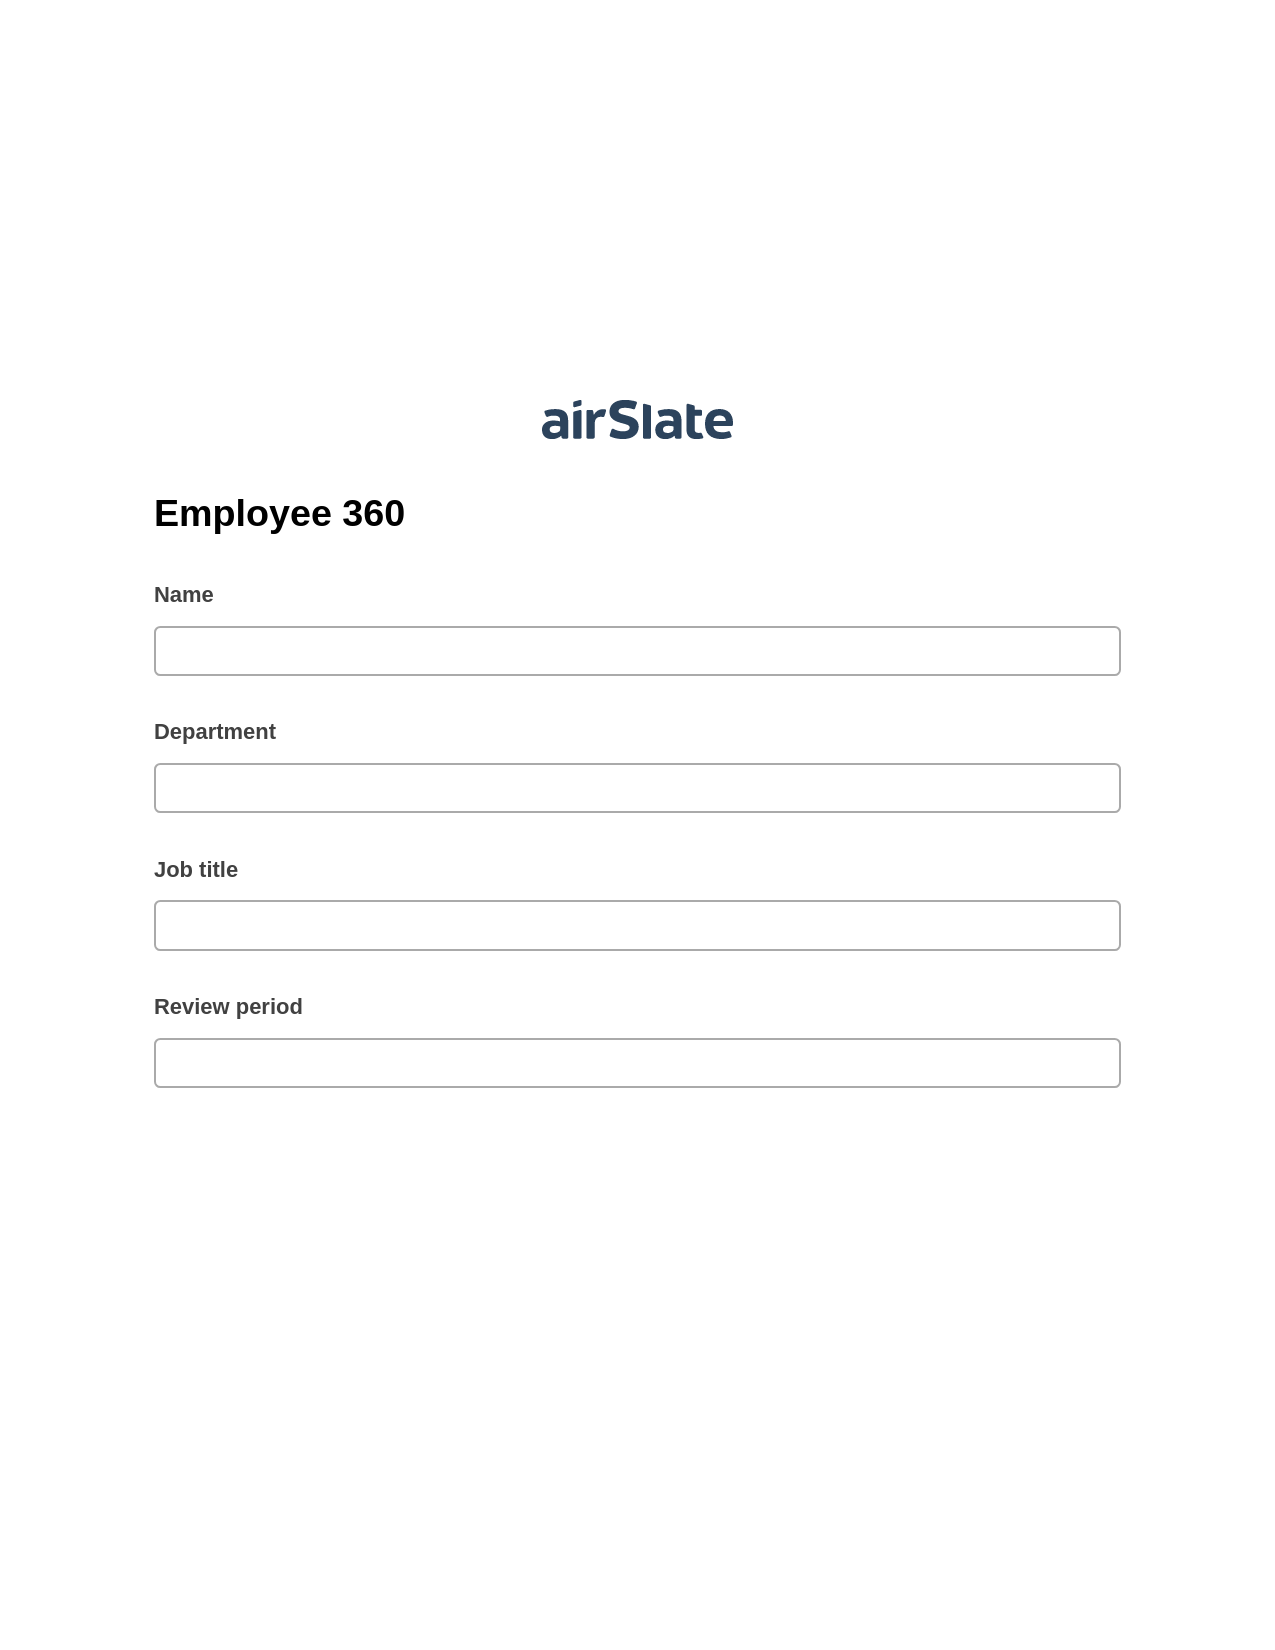 Multirole Employee 360 Pre-fill Dropdowns from CSV file Bot, Export to MS Dynamics 365 Bot, Export to Smartsheet